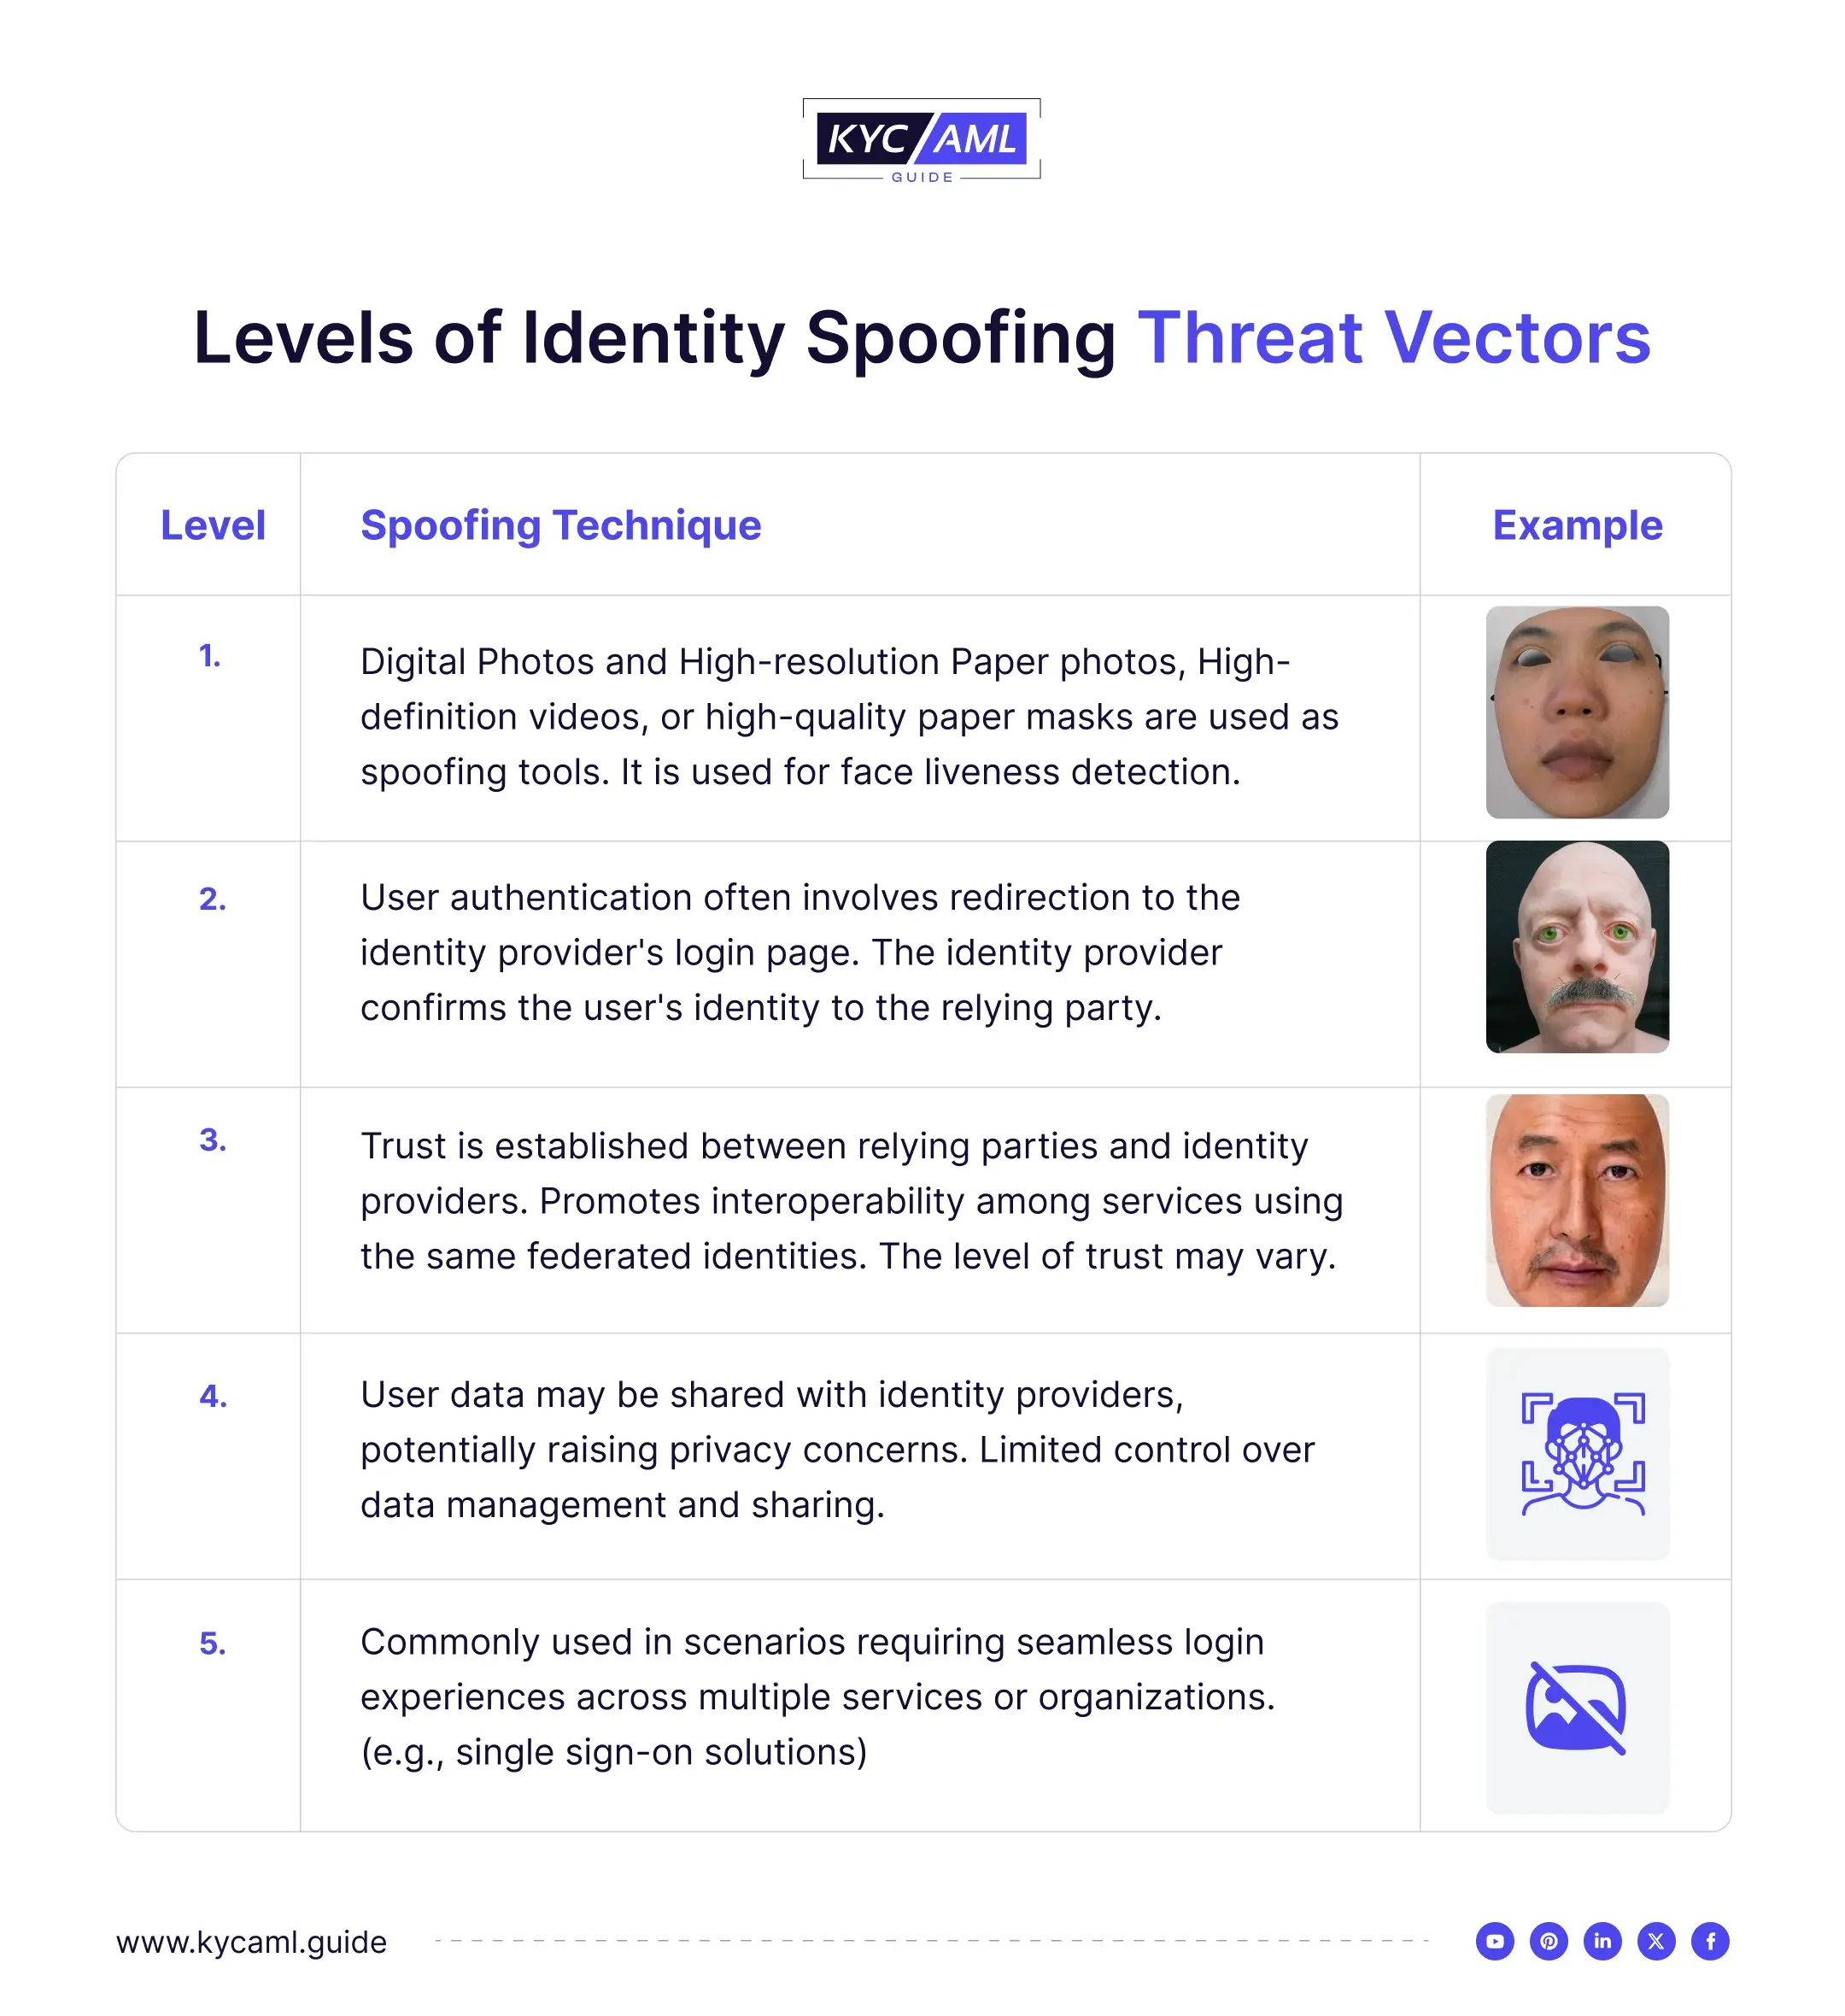 The table shows 5 Levels of Identity Spoofing Threat Vectors that are detected by Liveness Detection in Biometric Identity Verification